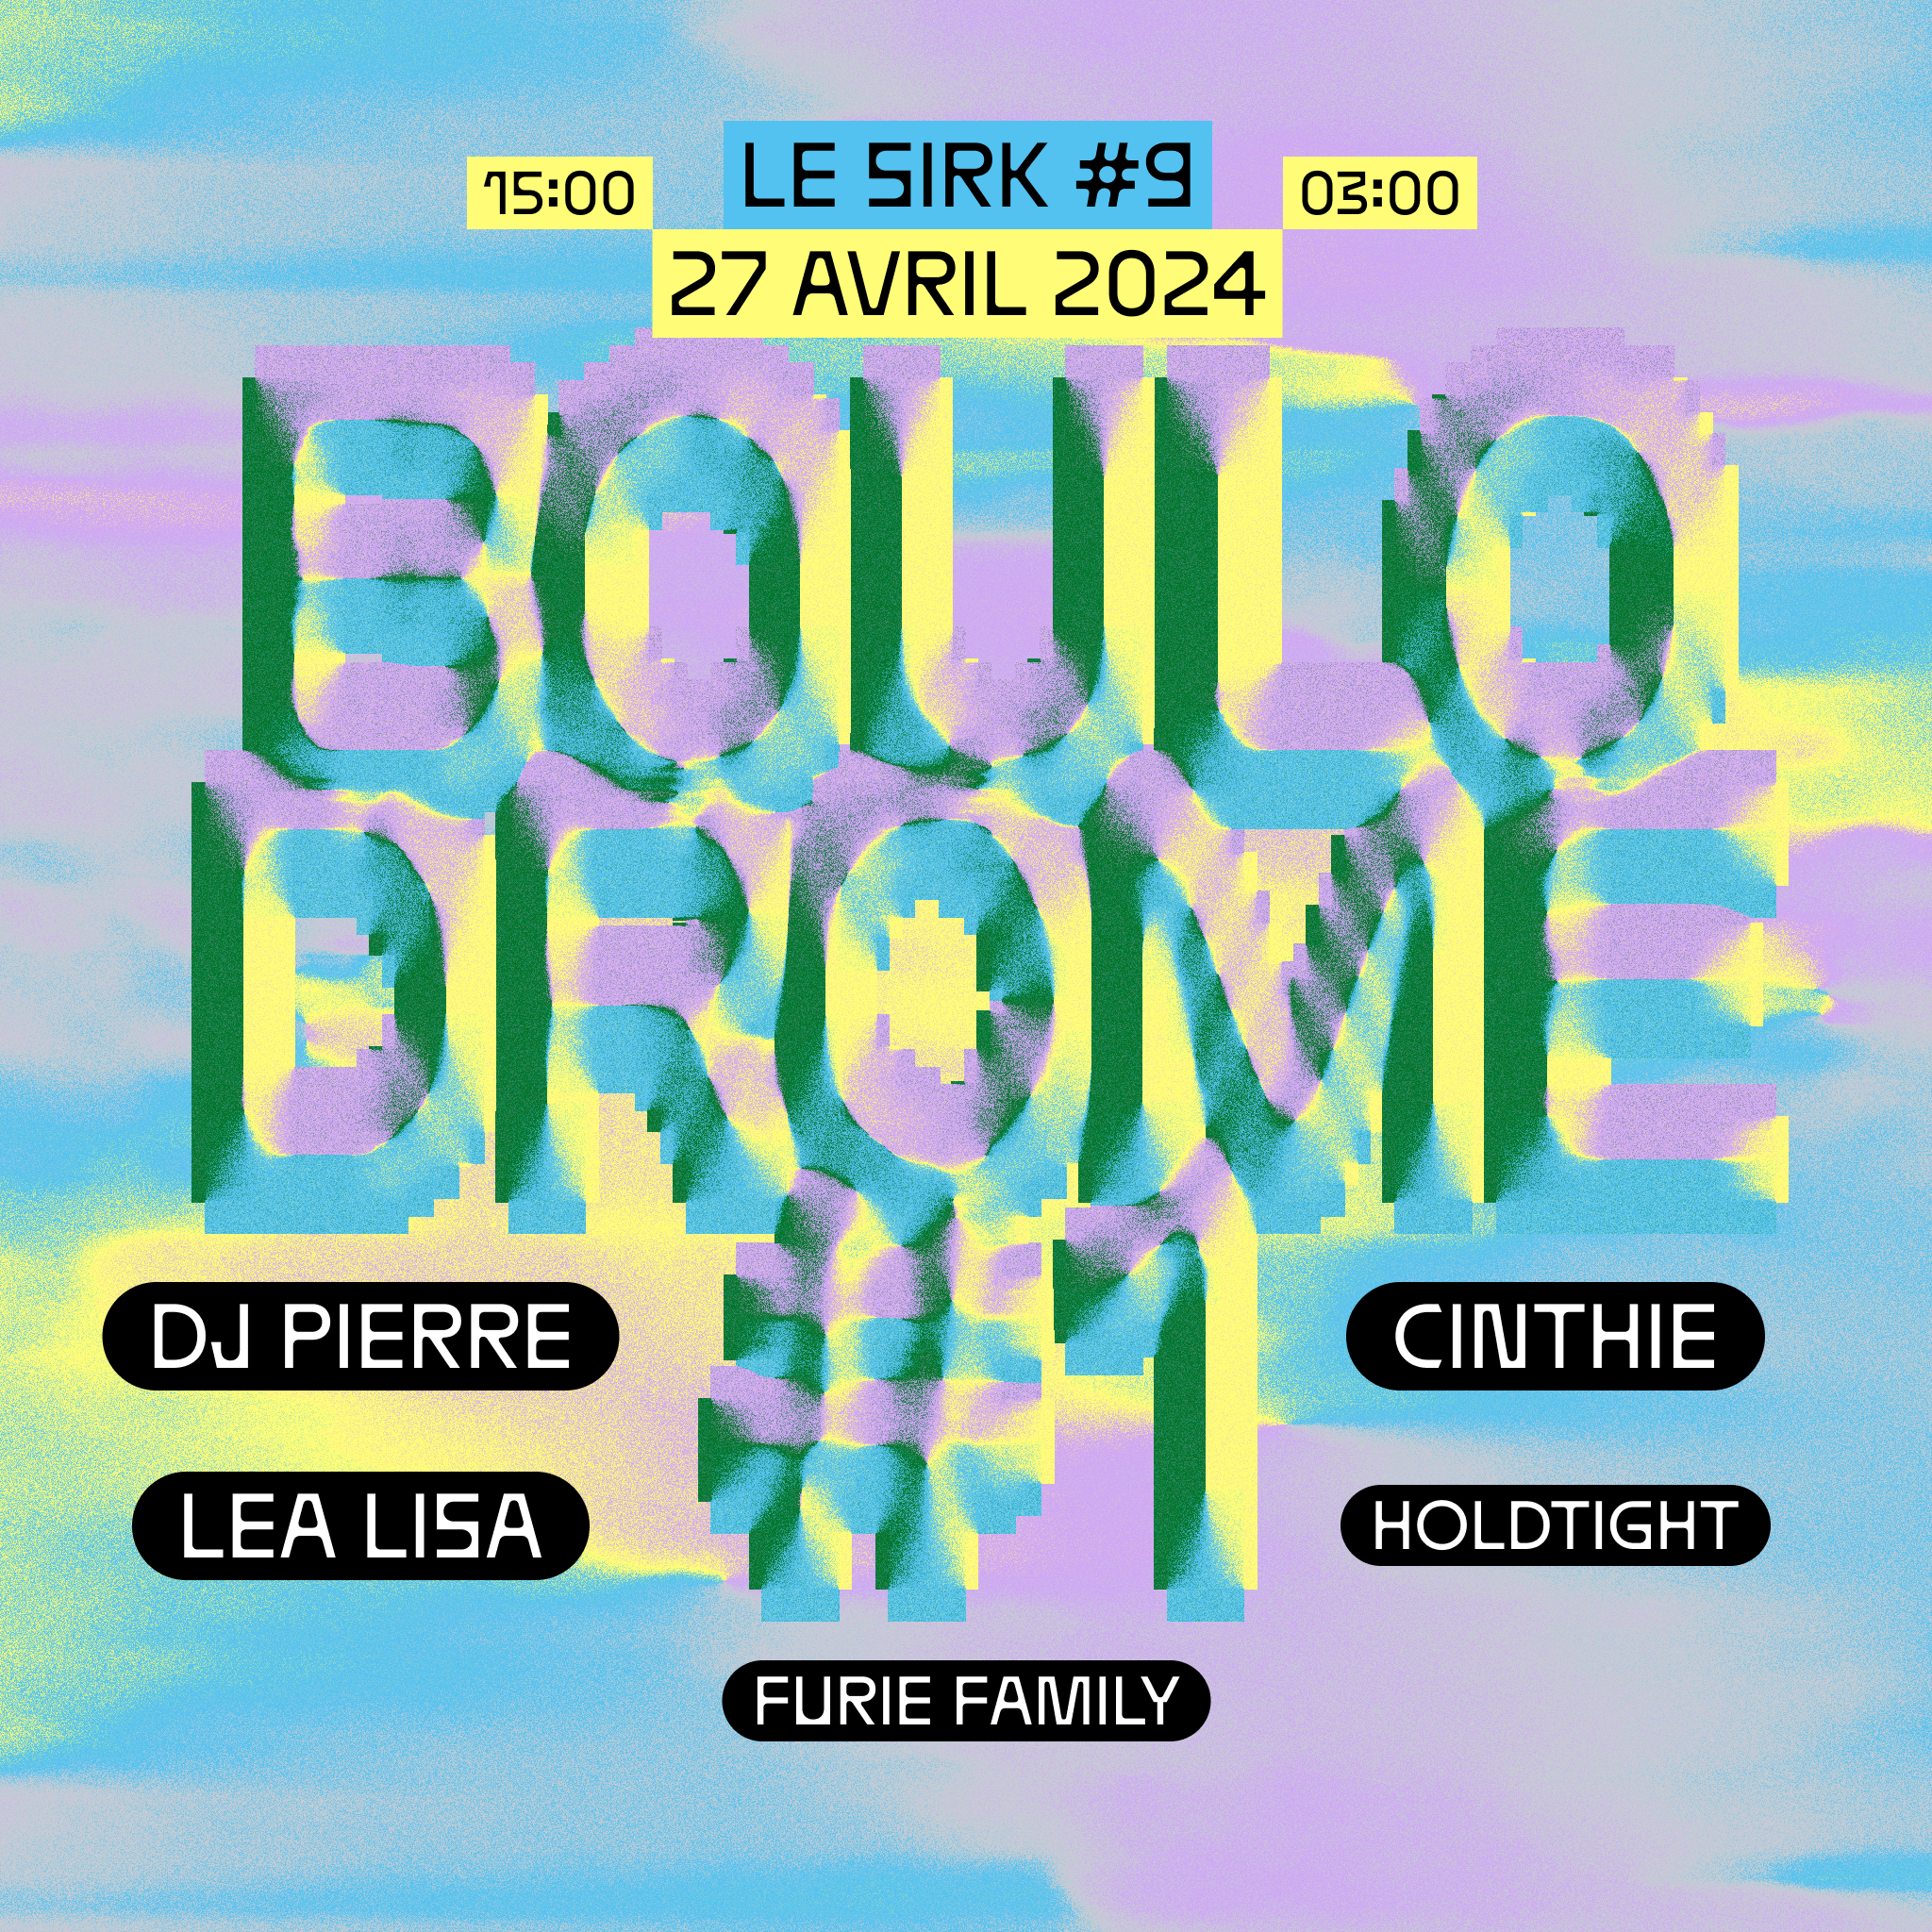 Le SIRK #9 at Boulodrome #1 - フライヤー表